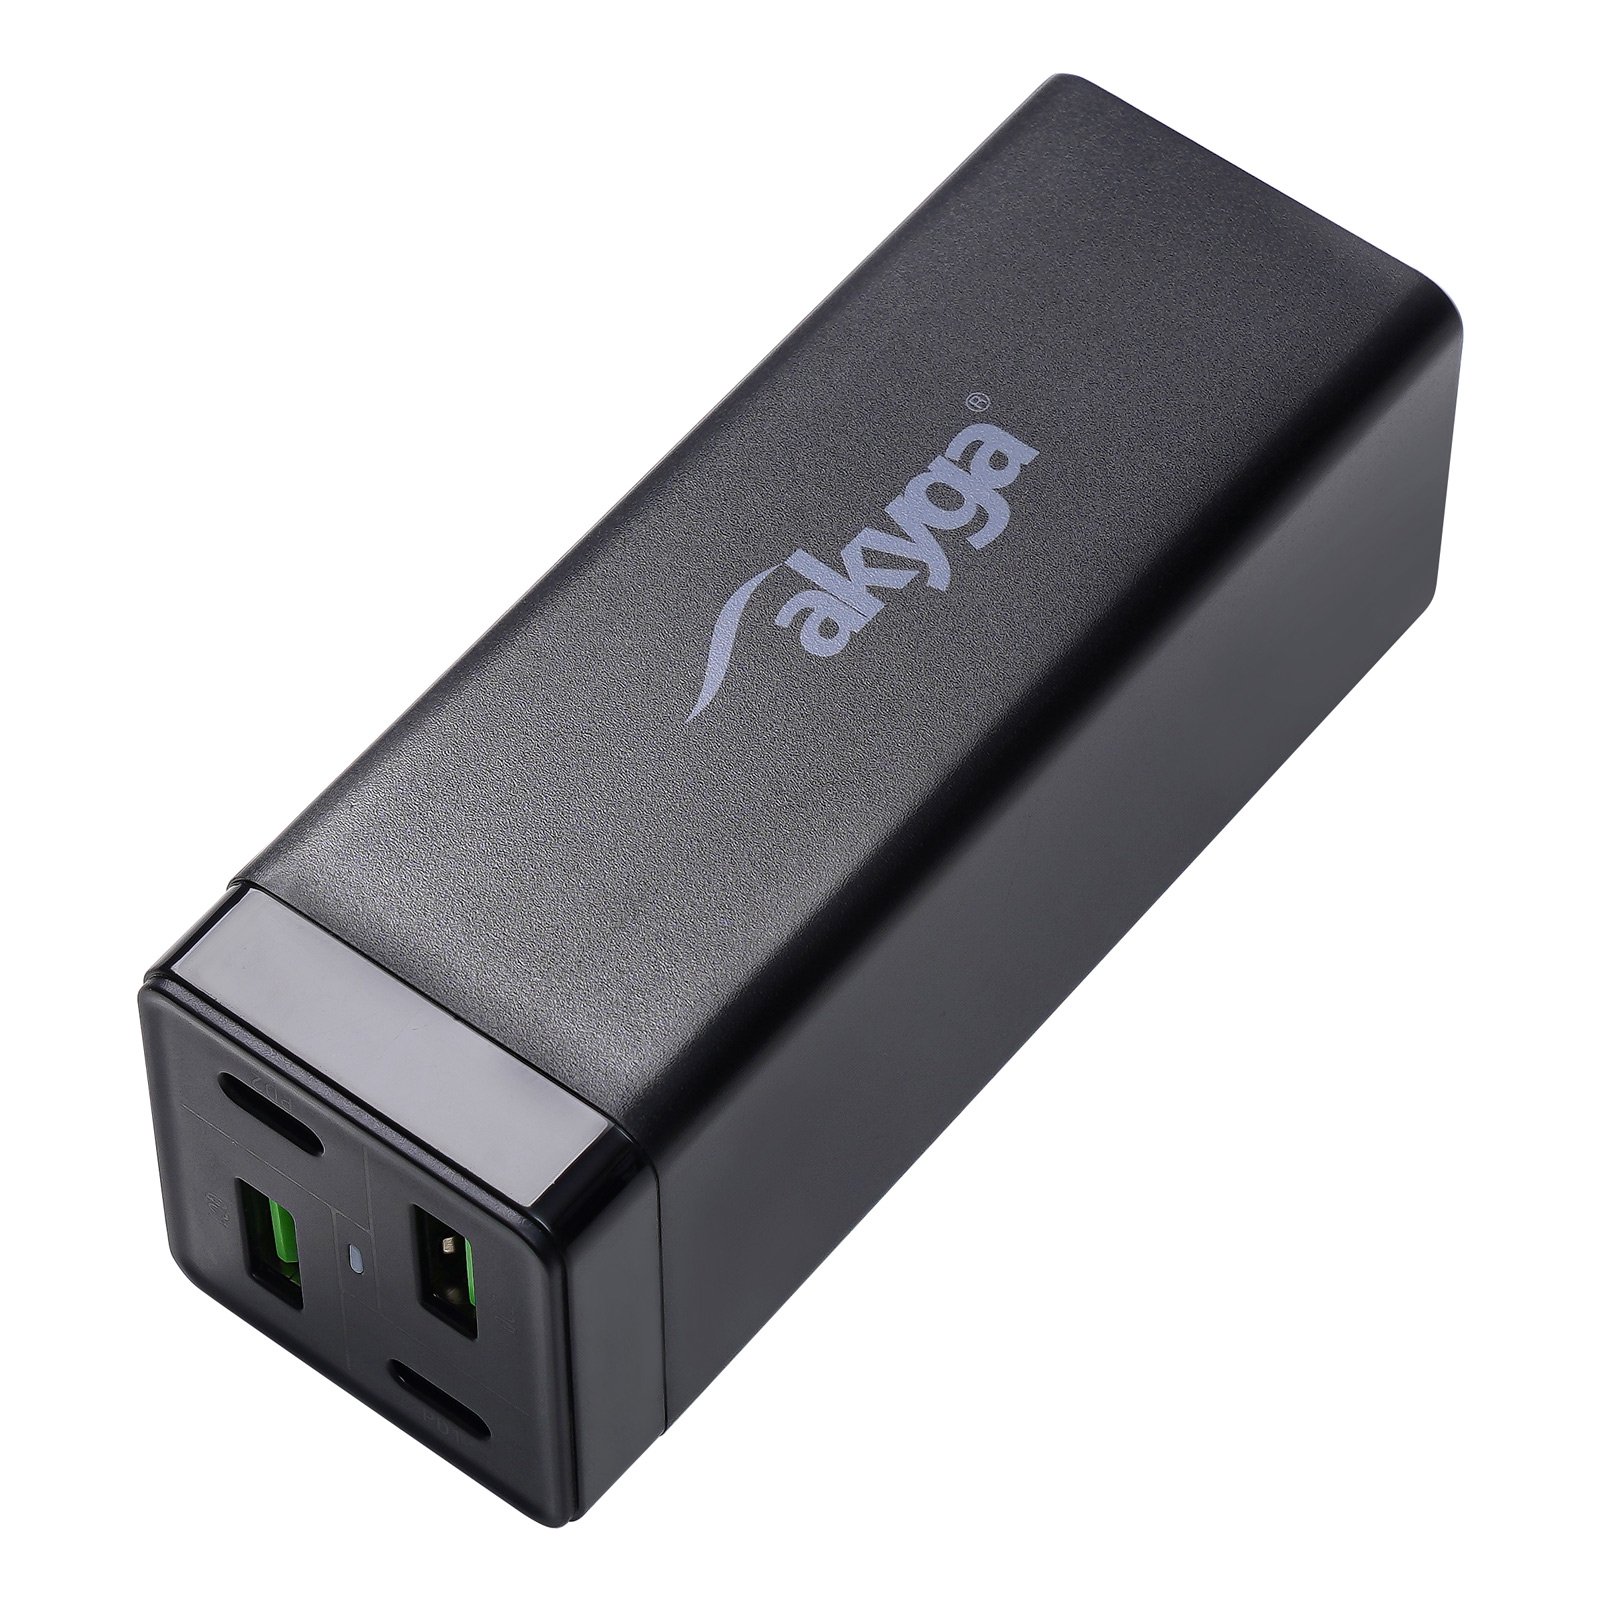 main_image Chargeur USB AK-CH-17 Charge Brick 2x USB-A + 2x USB-C PD 5-20 V / max 3.25A 65W Quick Charge 4+